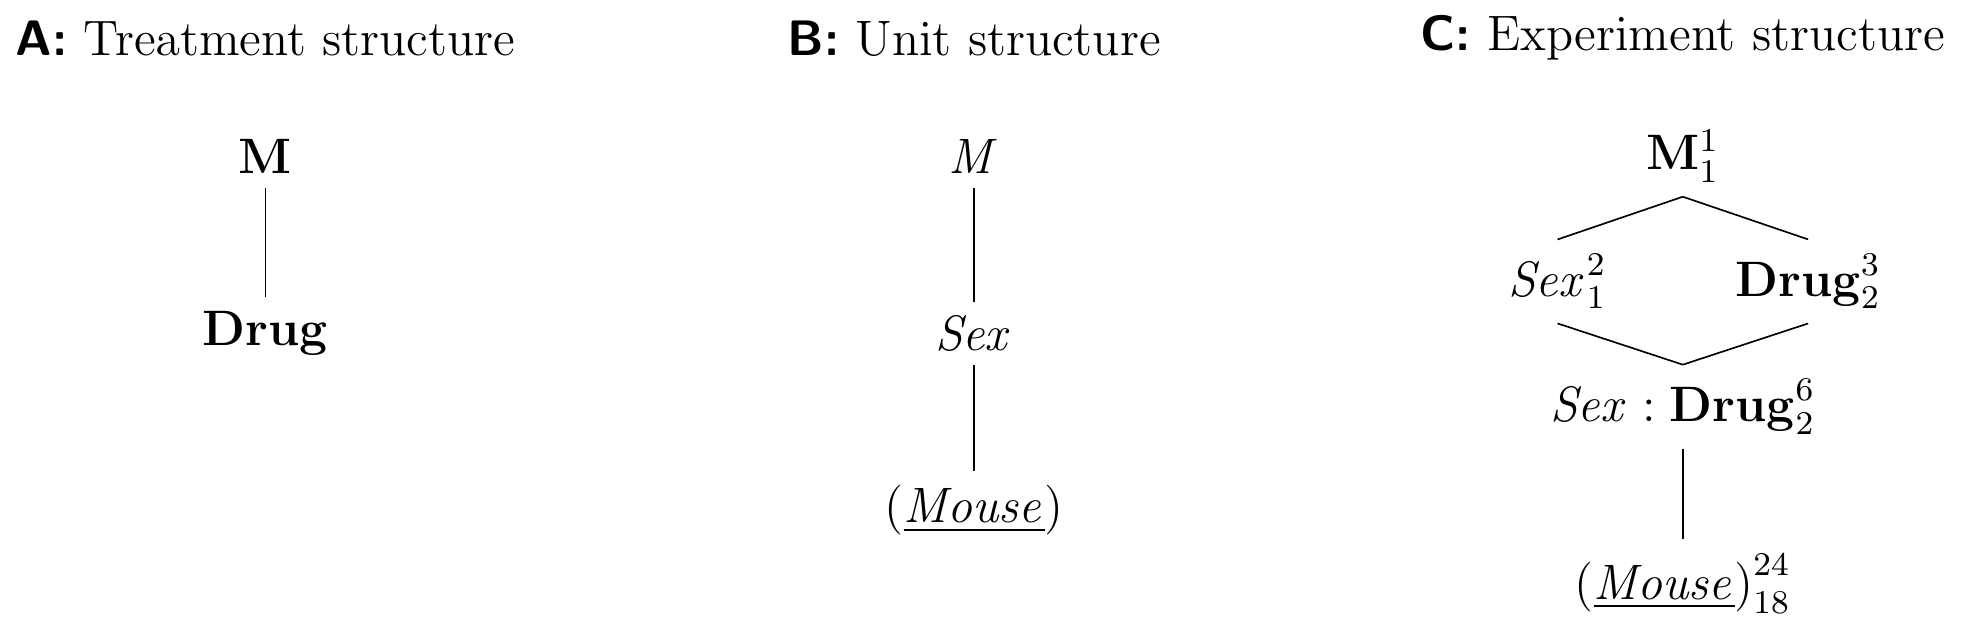 A blocked design using sex of mouse as a fixed classification factor, with four female and four male mice in of three each treatment groups.